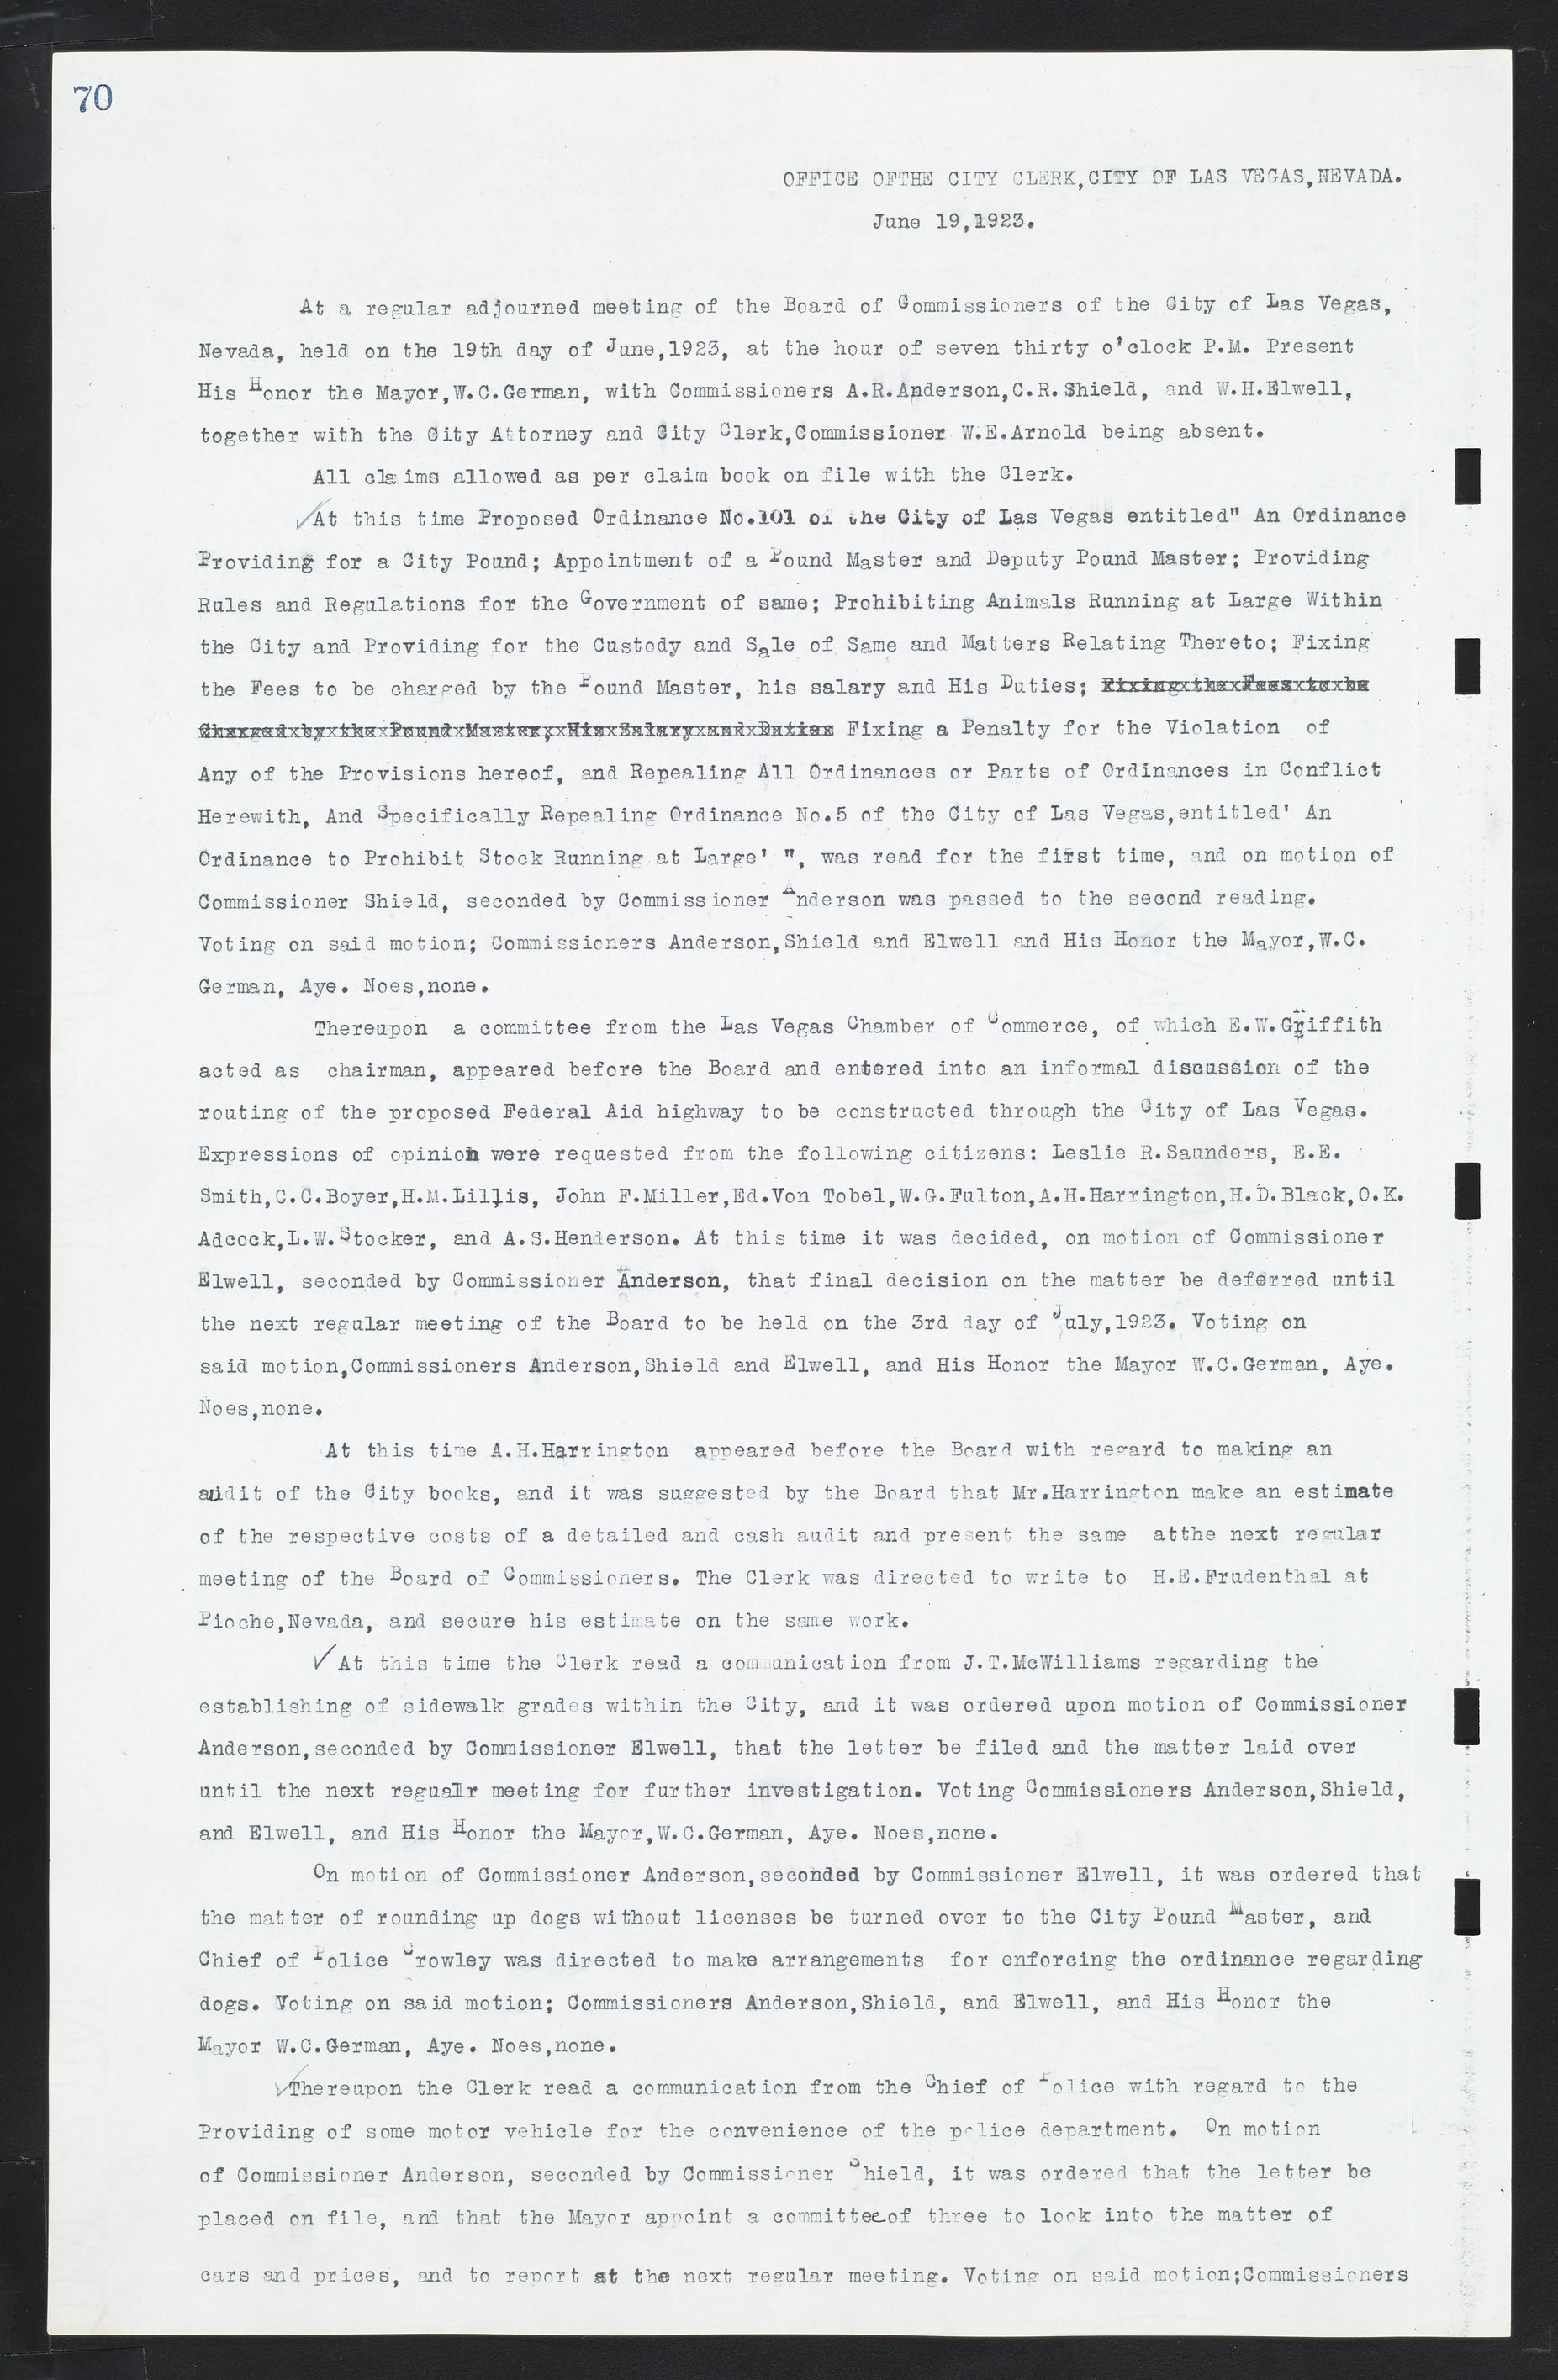 Las Vegas City Commission Minutes, March 1, 1922 to May 10, 1929, lvc000002-77